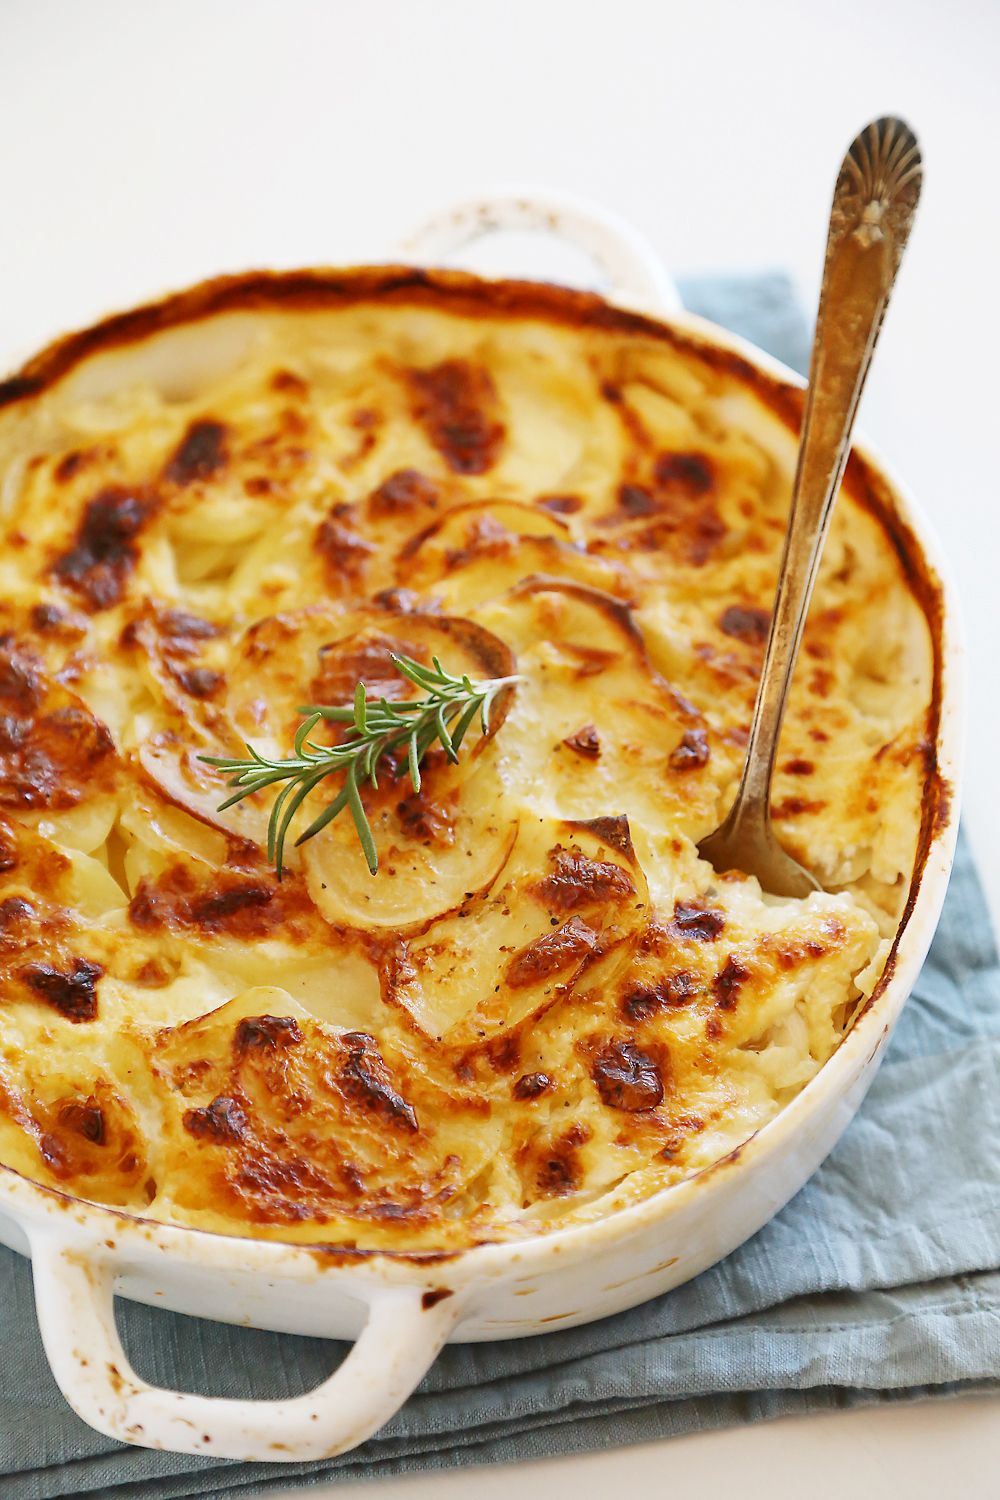 Garlic and Goat Cheese Potato Gratin – The best potato gratin I've ever made, and so easy! Deliciously rich and creamy, with melt-in-your-mouth potatoes and garlic! | thecomfortofcooking.com